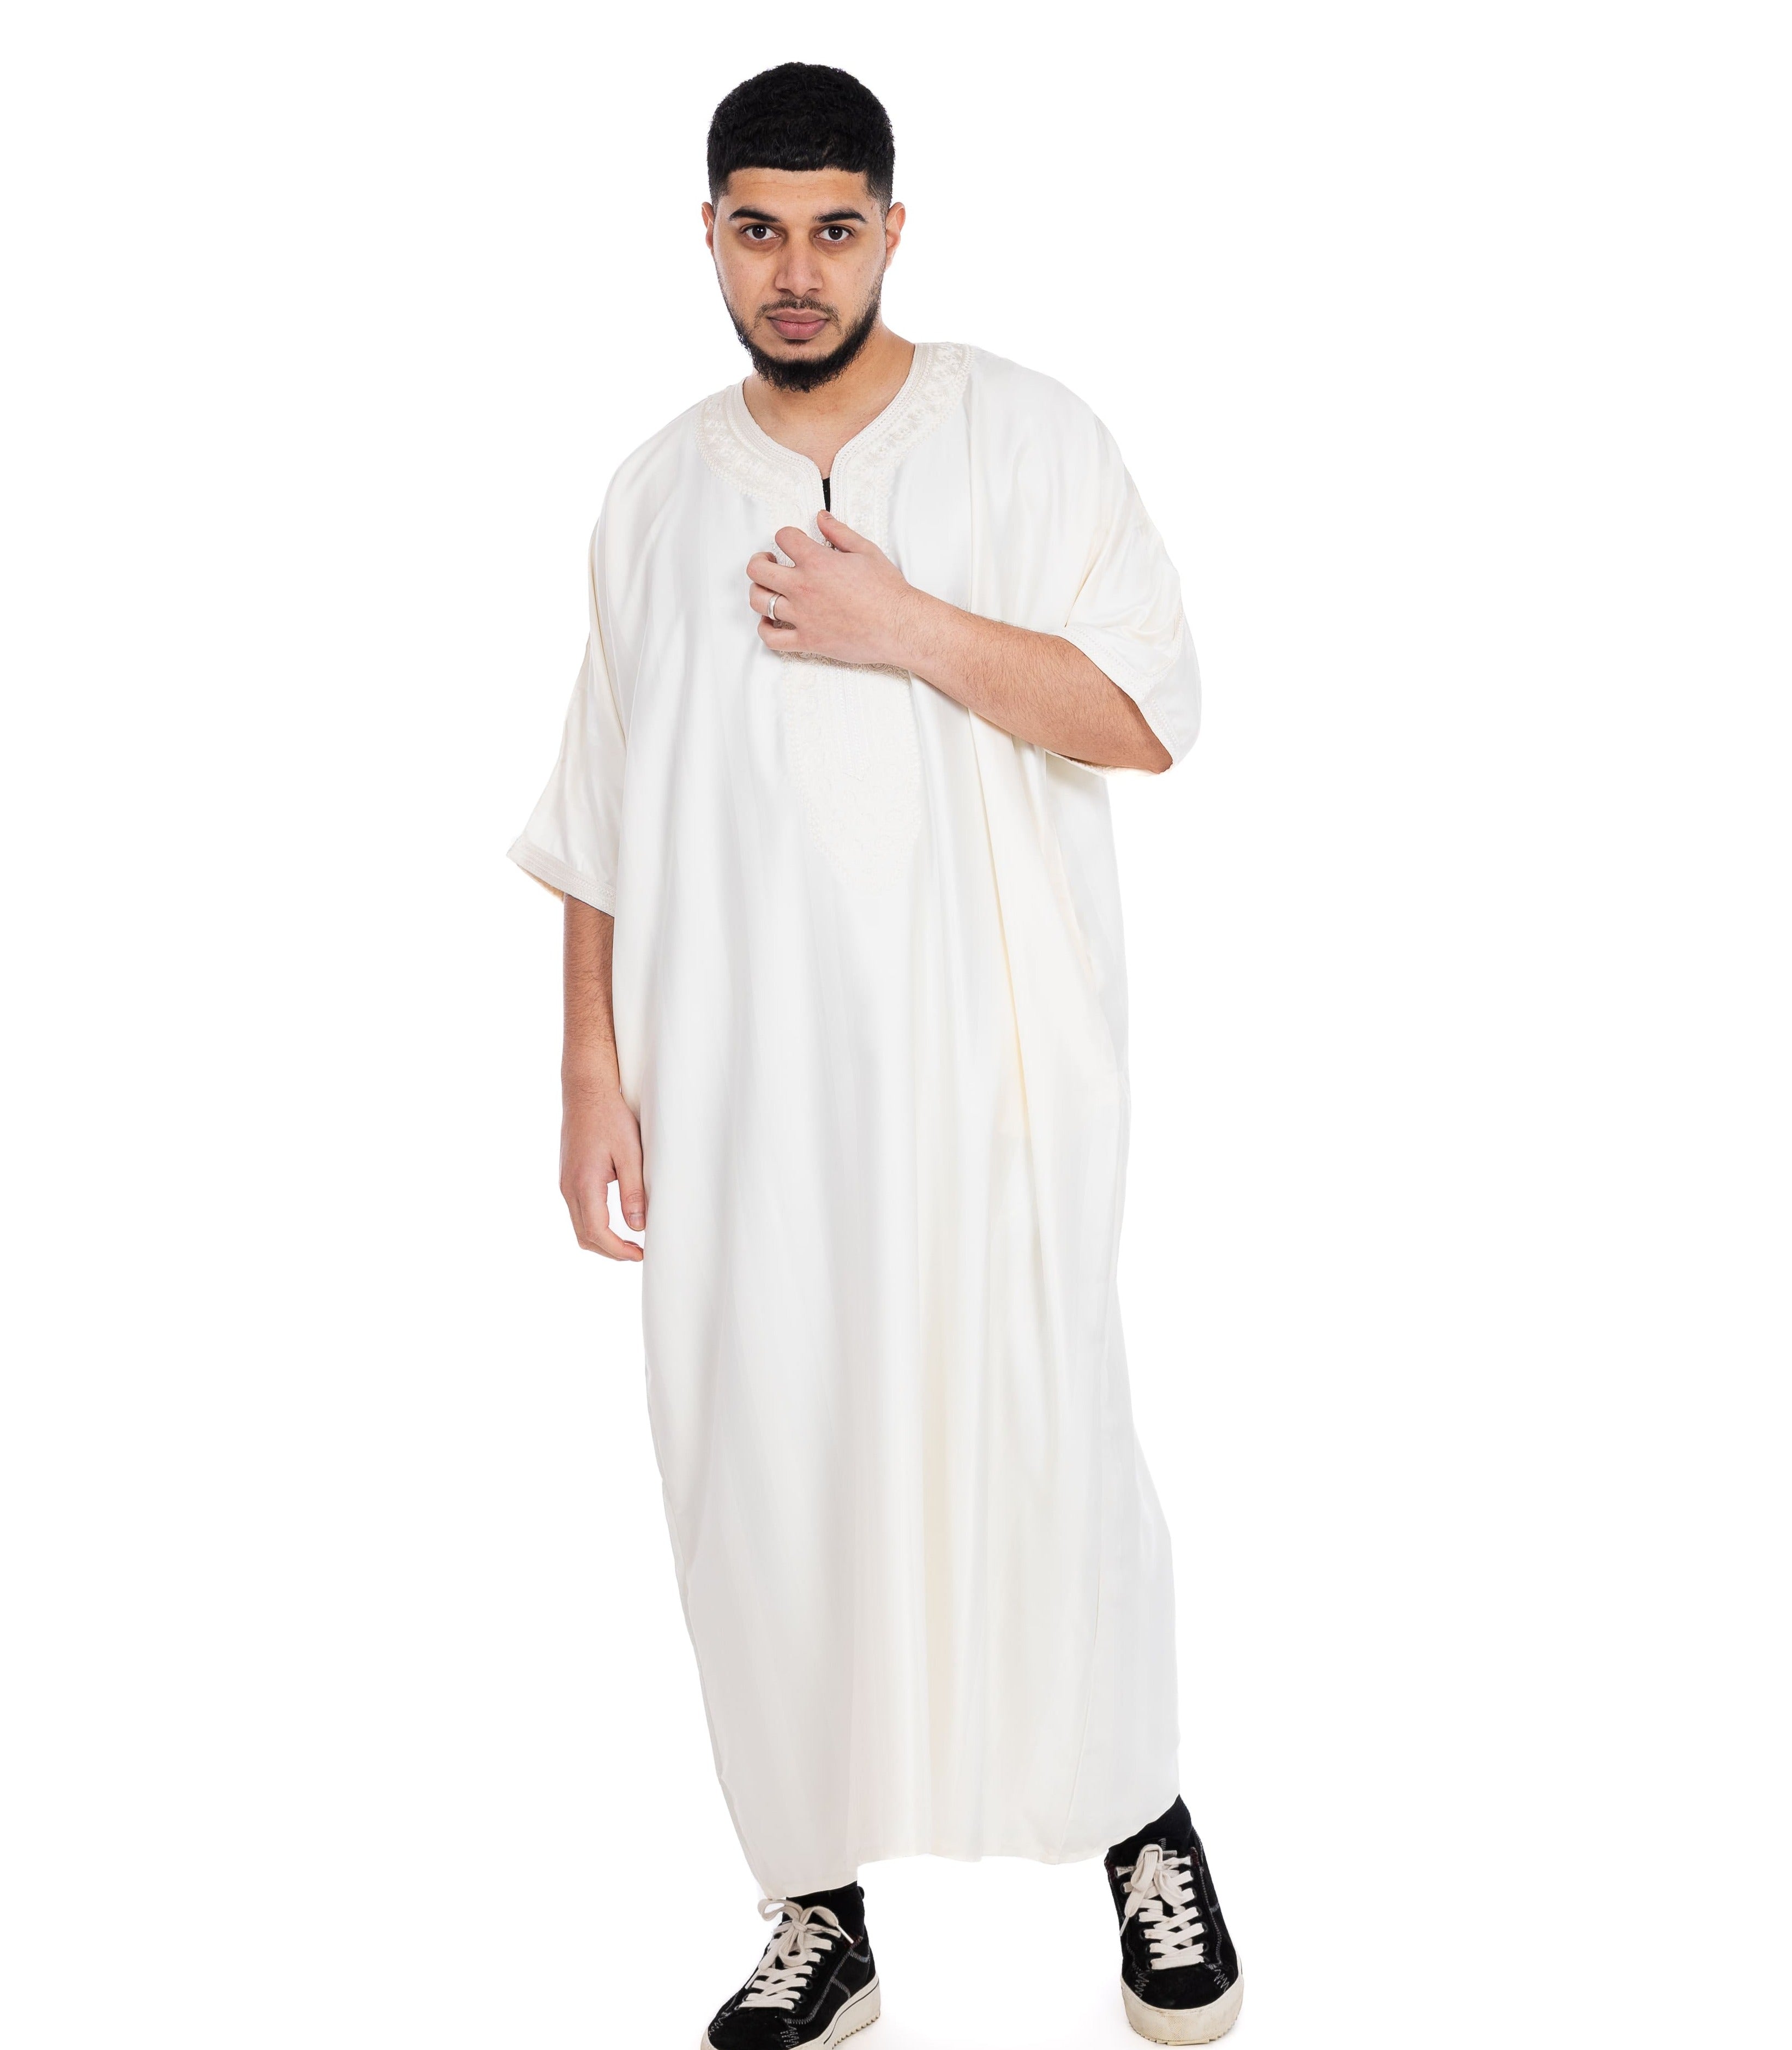 Offwhite Shiny Jawhara moroccan Thobe Collection - newarabia Apparel &amp; Accessories